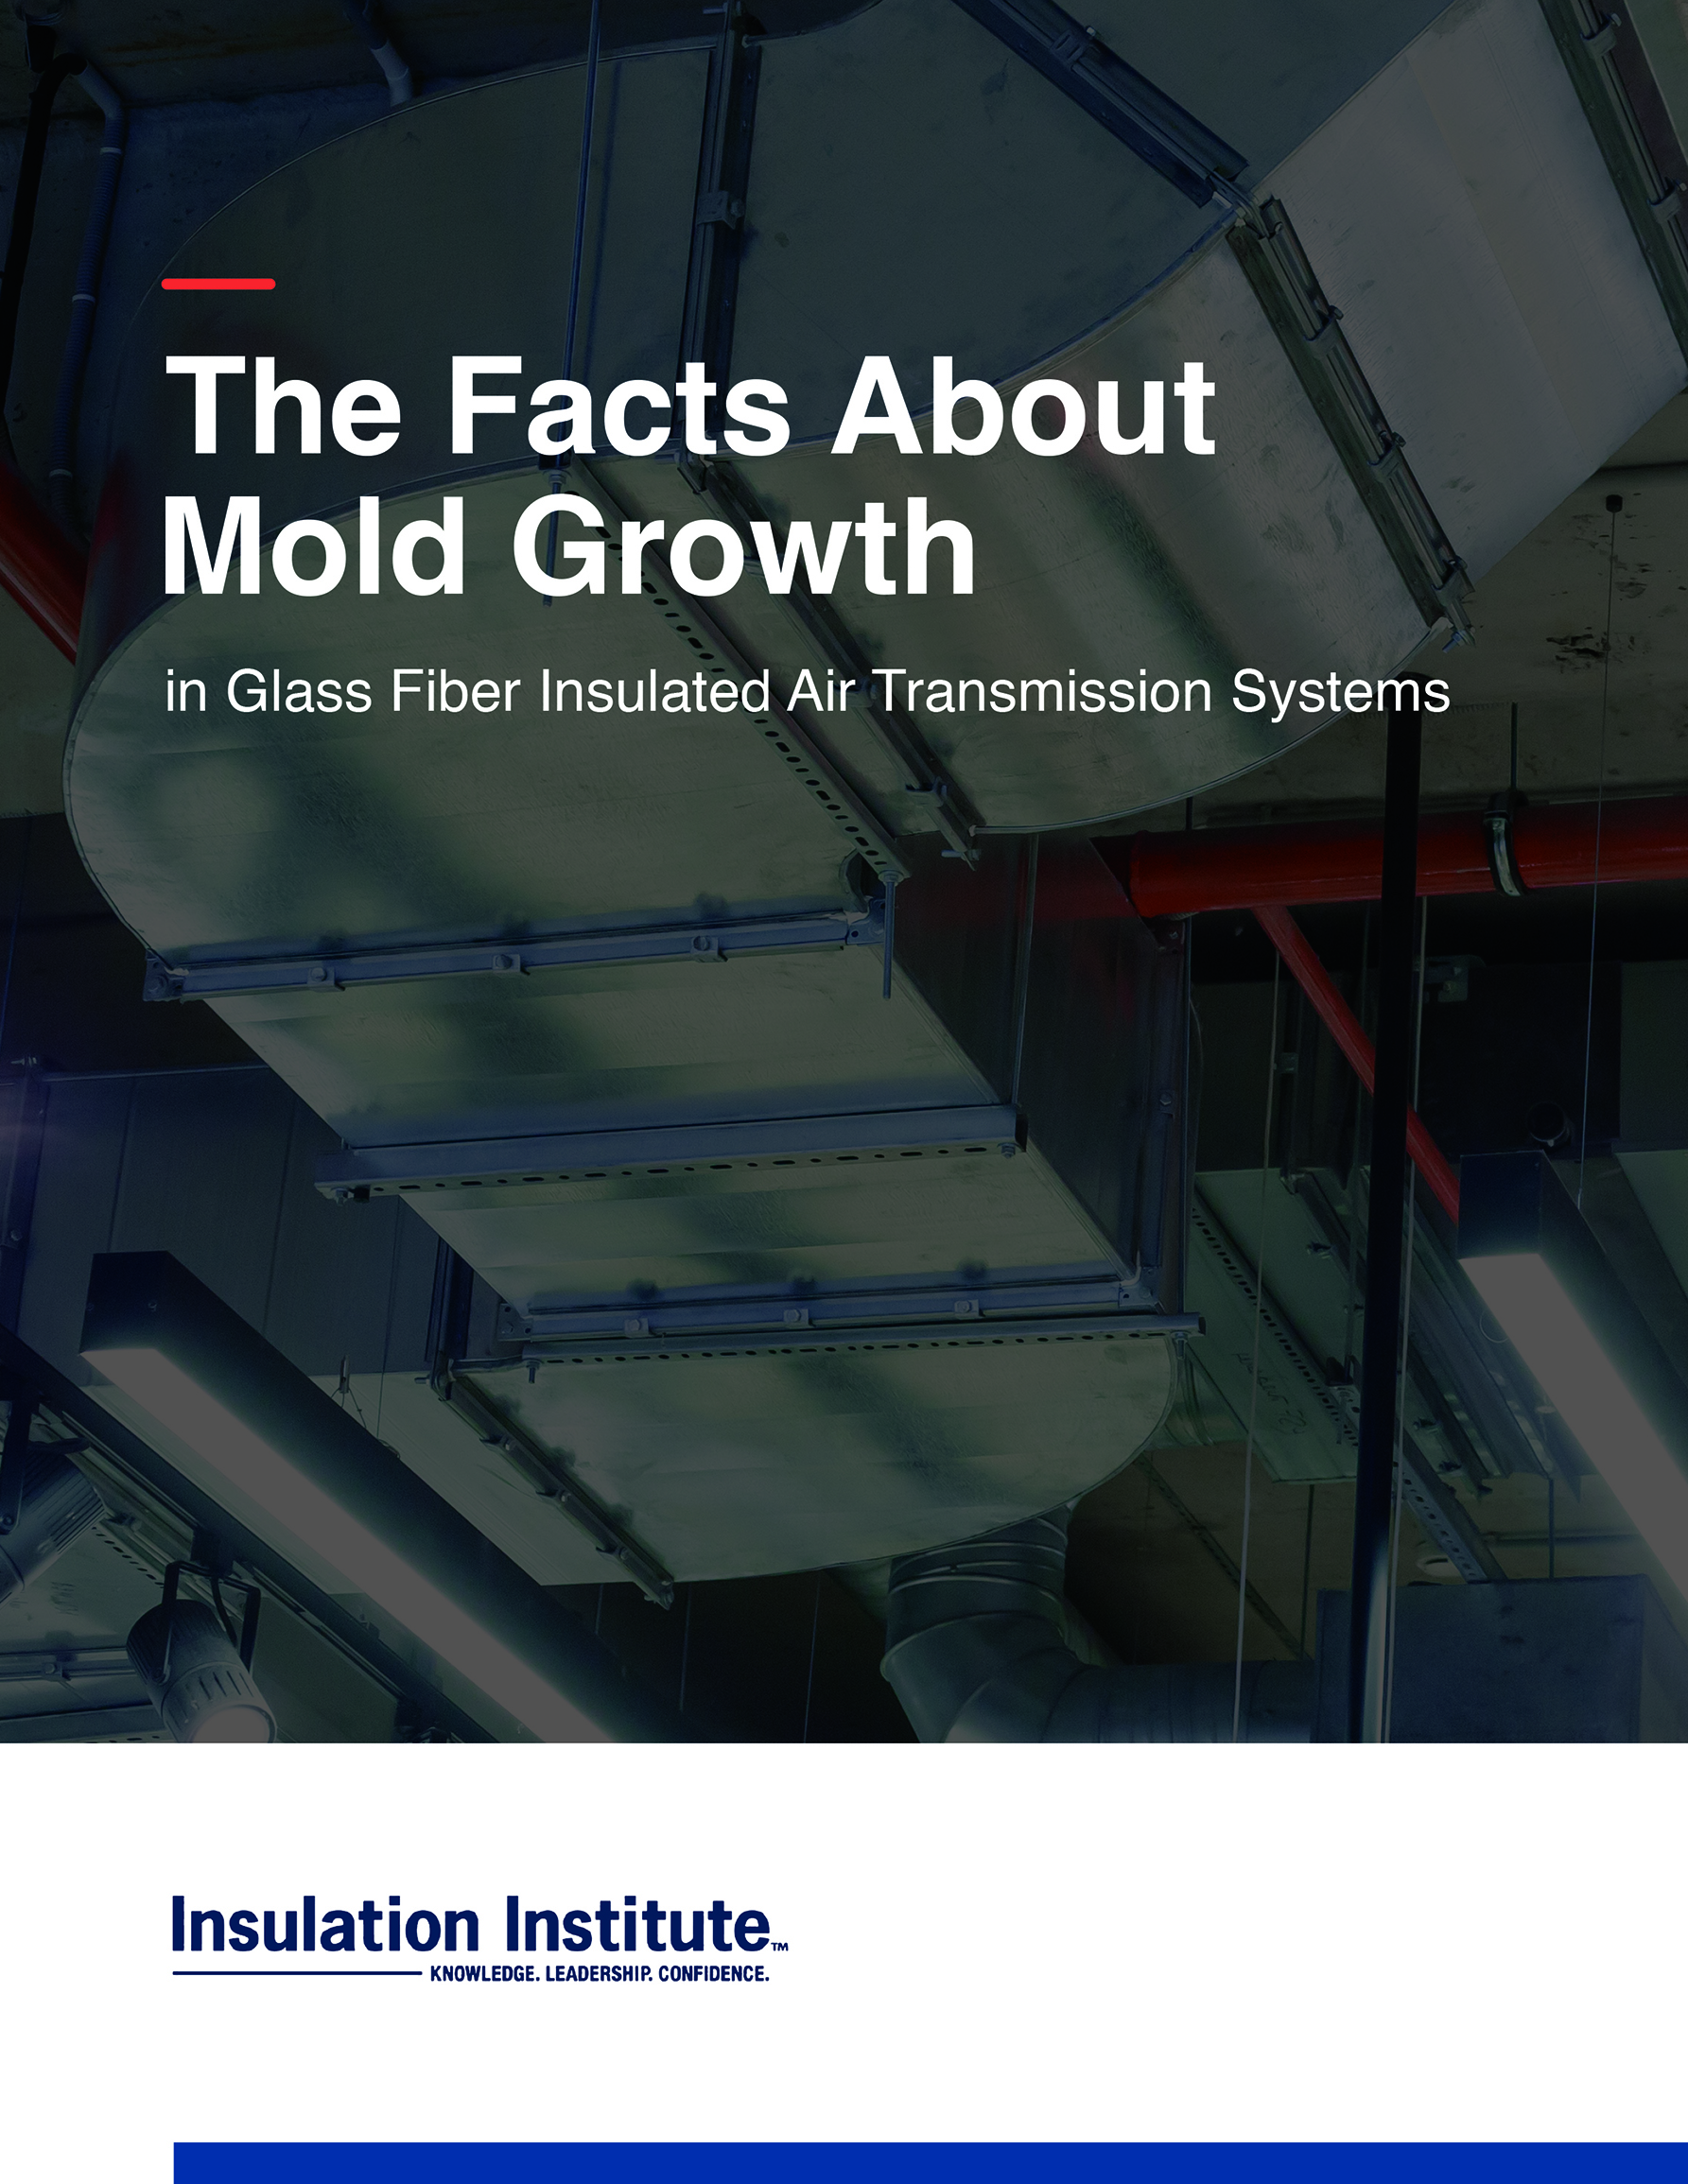 New Release: The Facts About Mold Growth